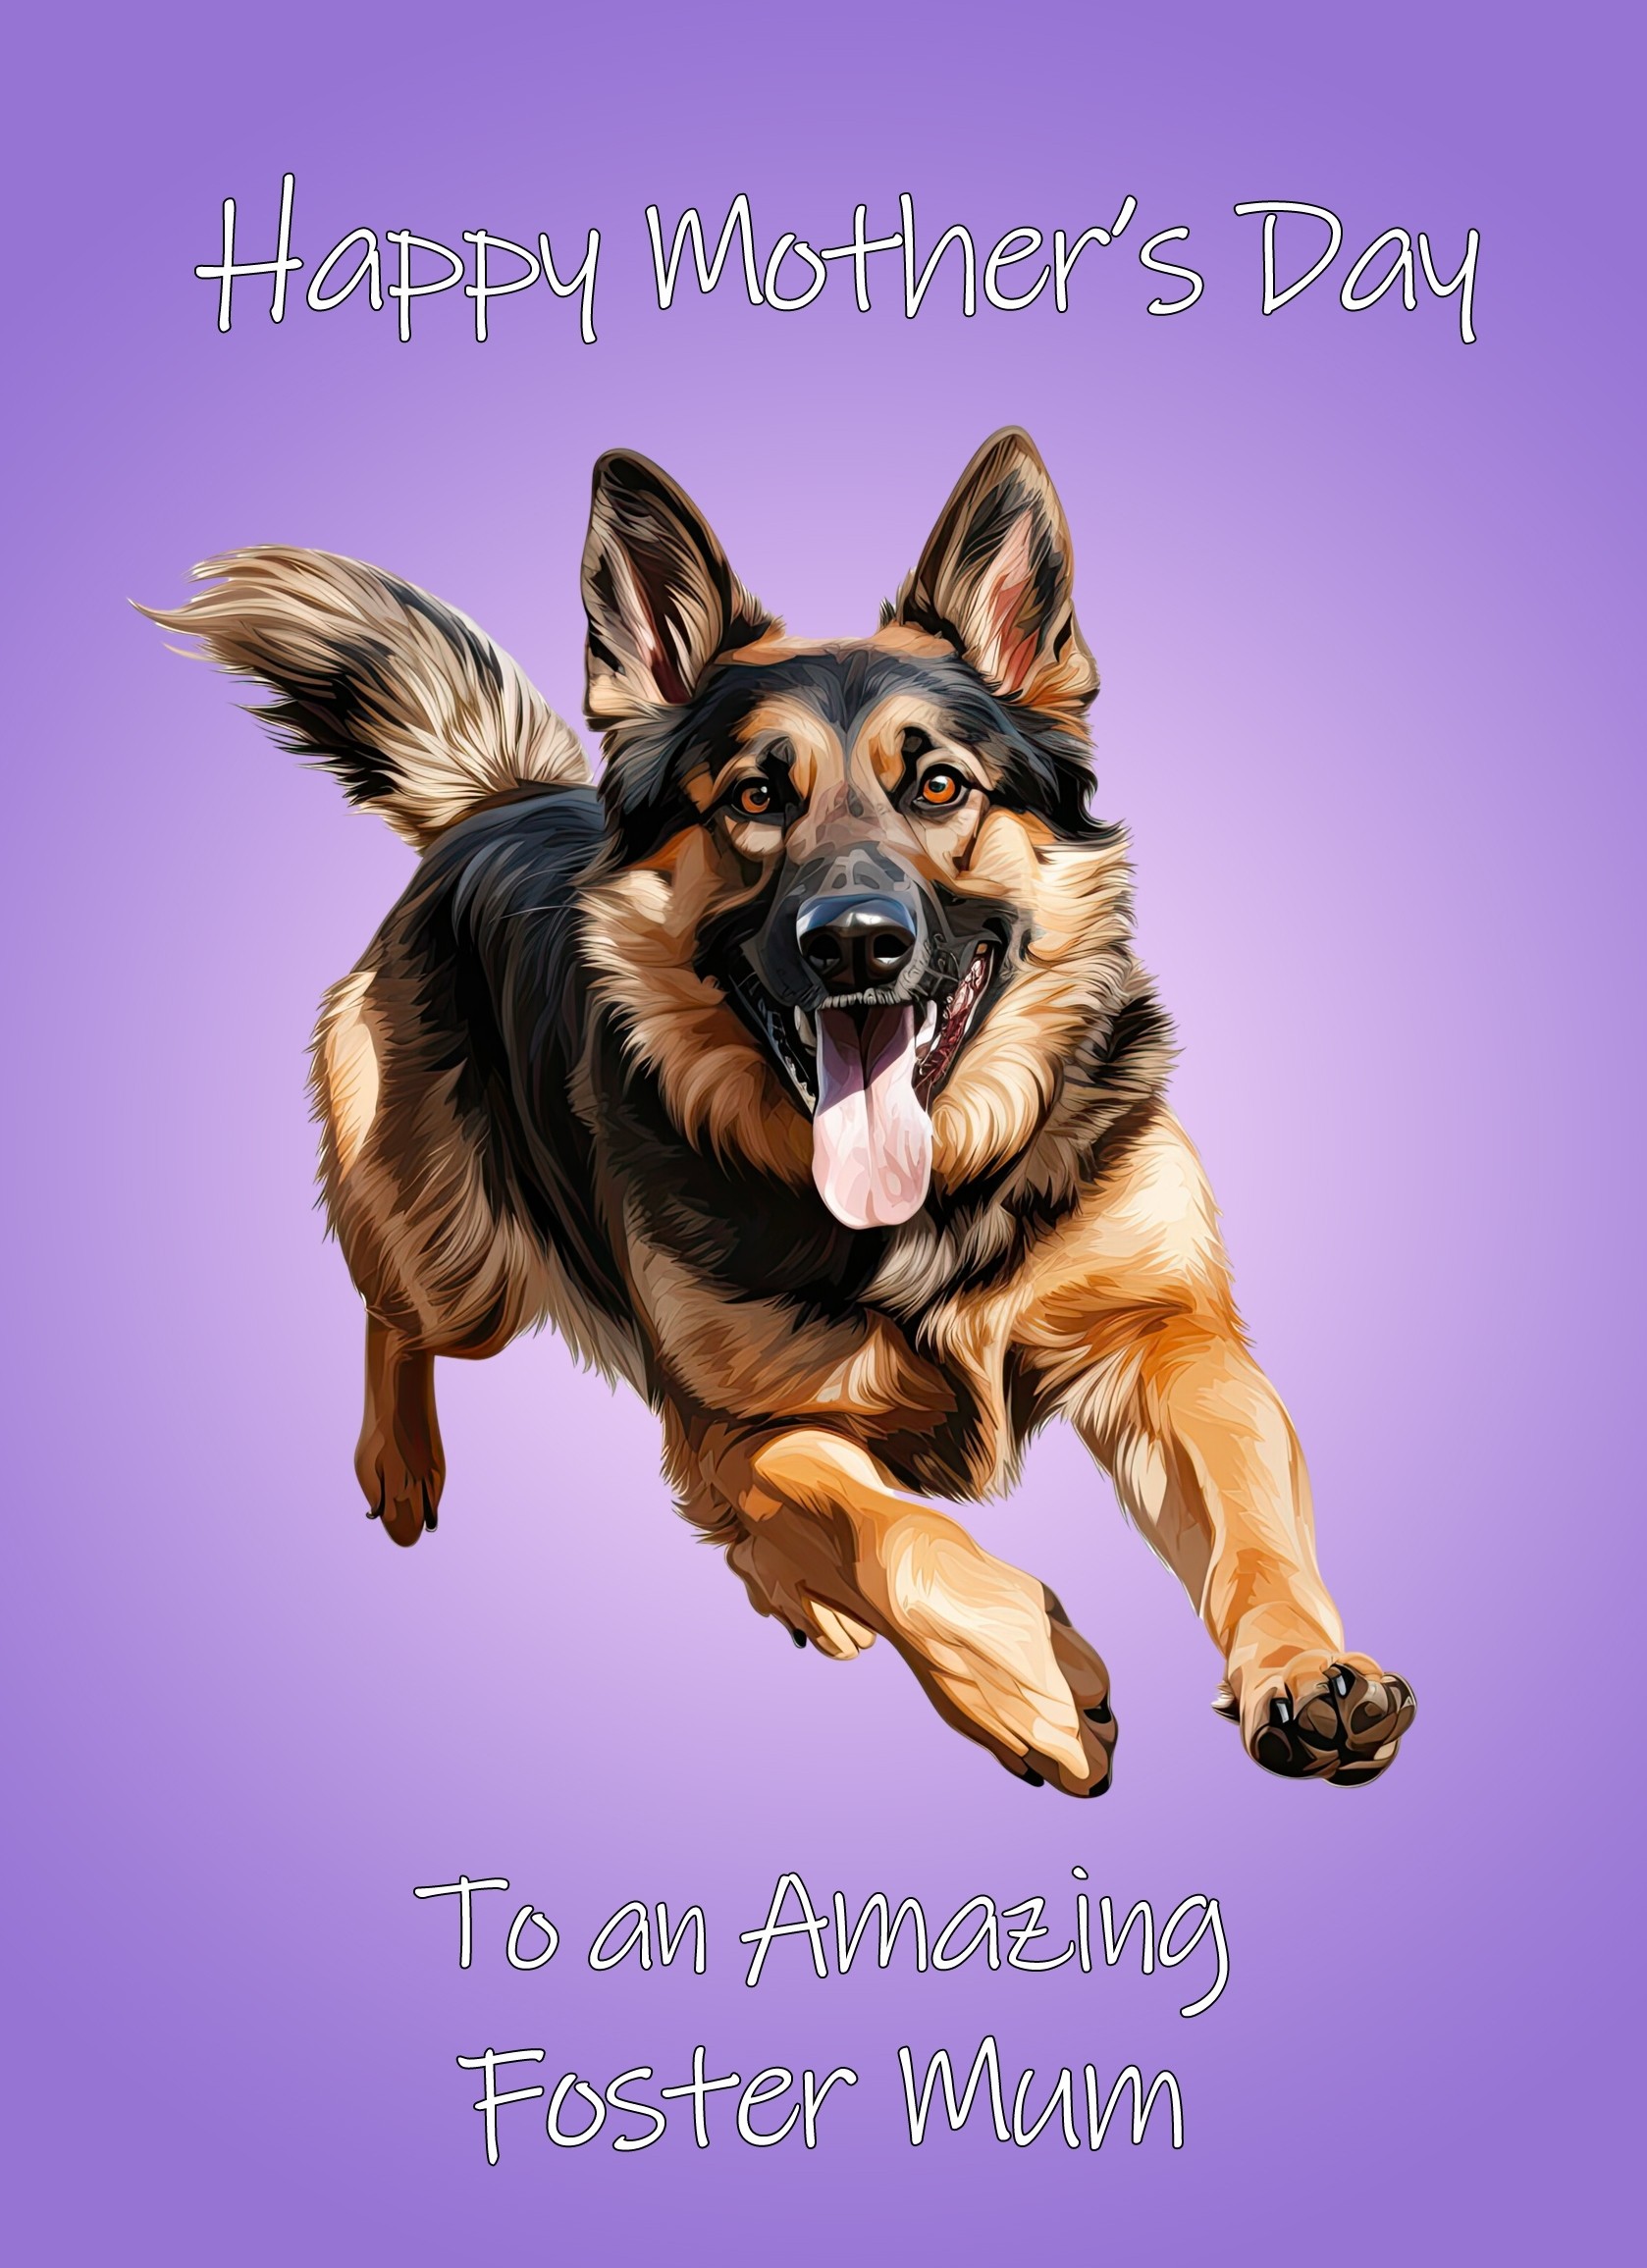 German Shepherd Dog Mothers Day Card For Foster Mum